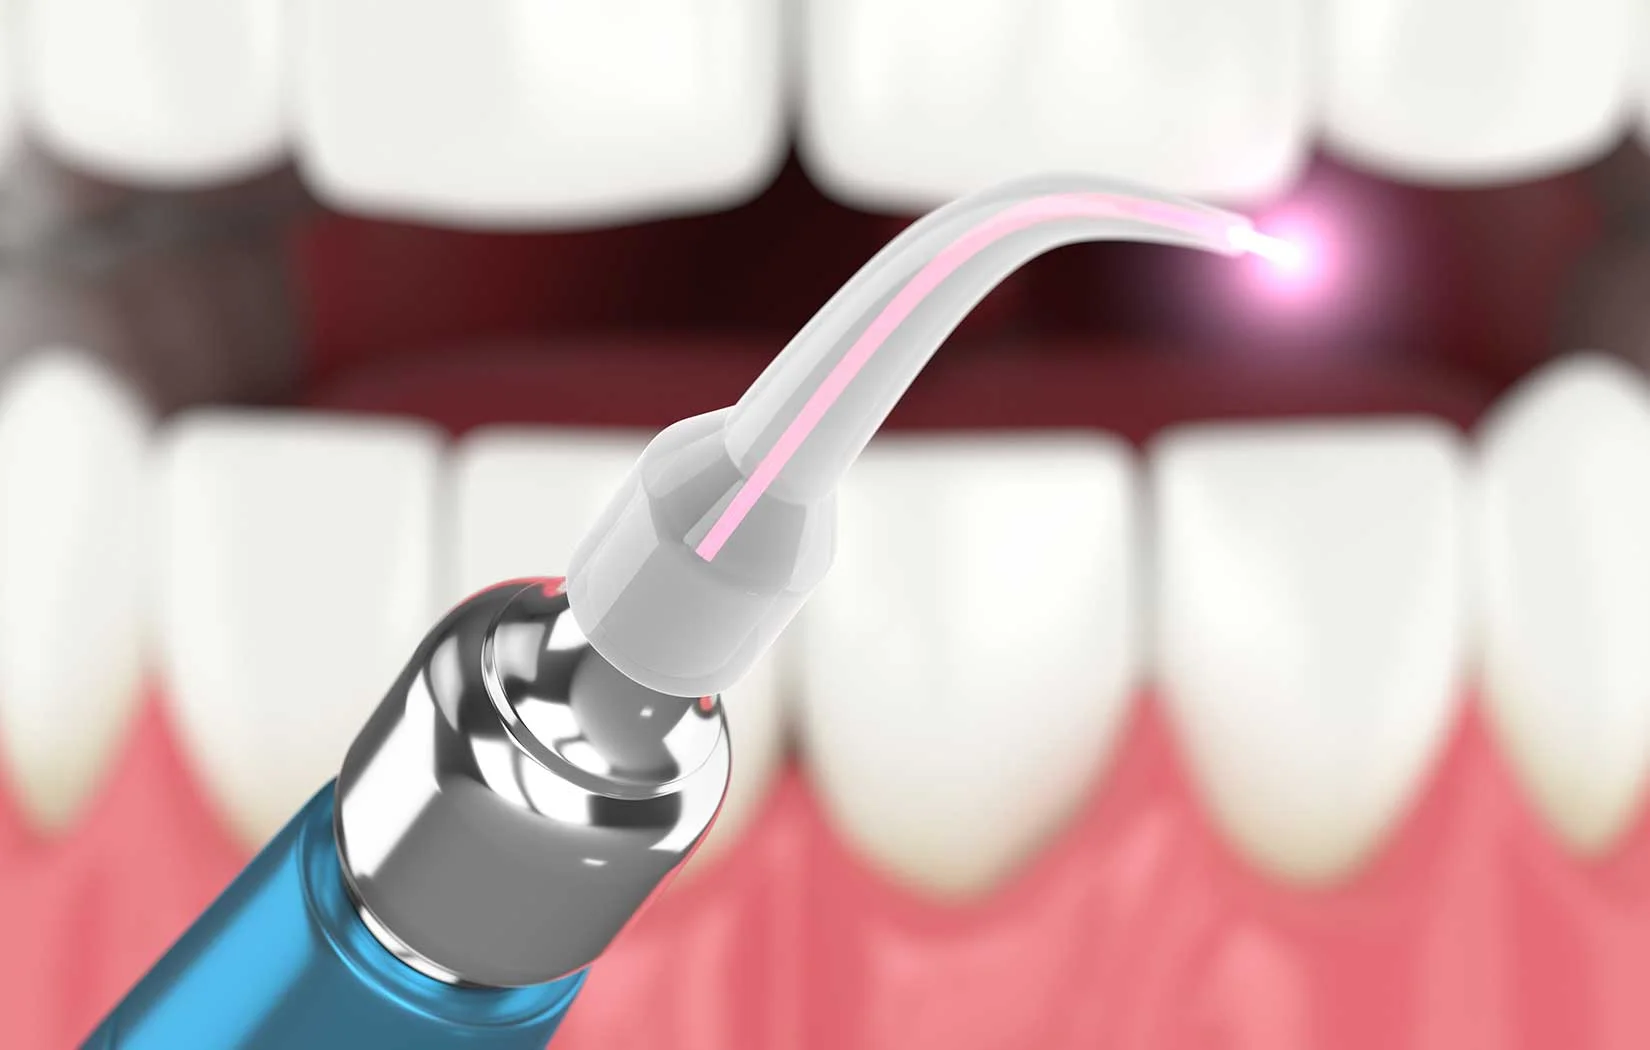 Laser treatment for periodontal disease in Brentwood, Los Angeles, CA